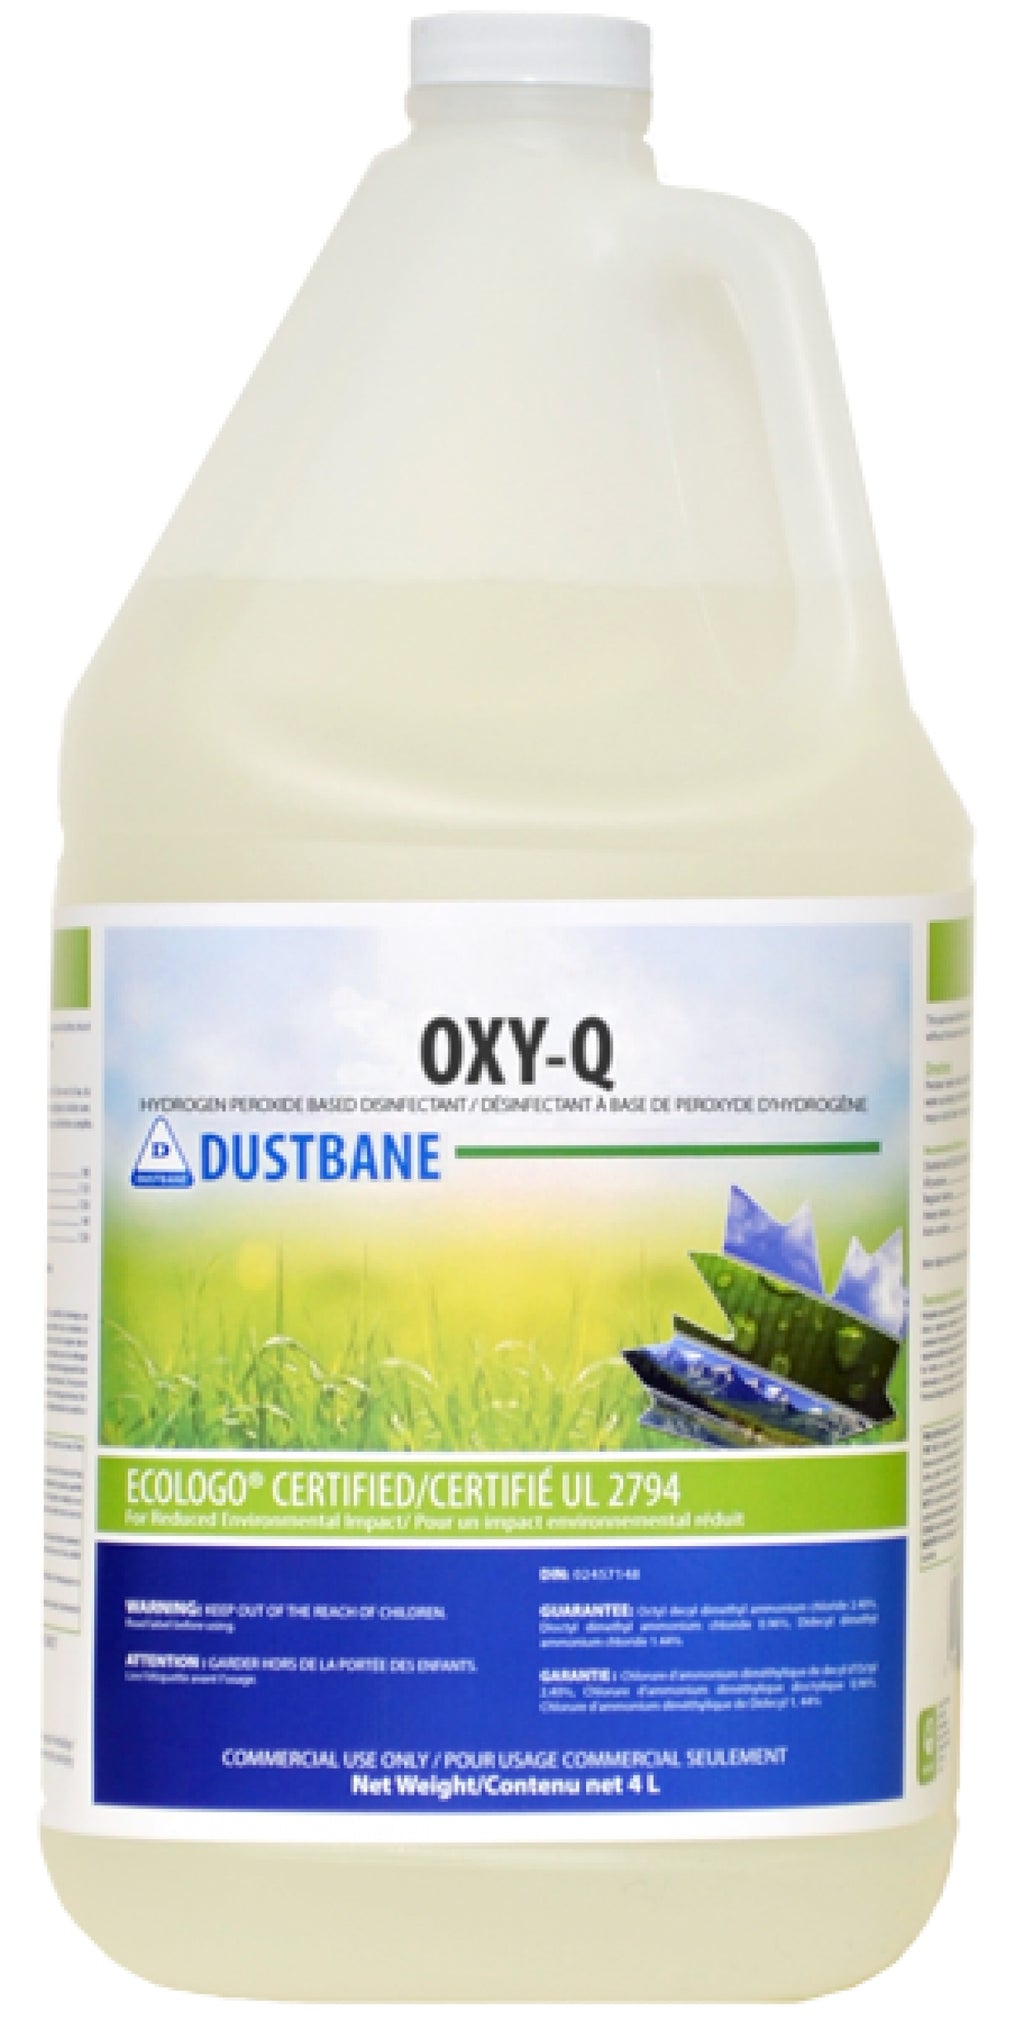 4L DUSTBANE® OXY-Q™ HYDROGEN PEROXIDE BASED DISINFECTANT, CONCENTRATE